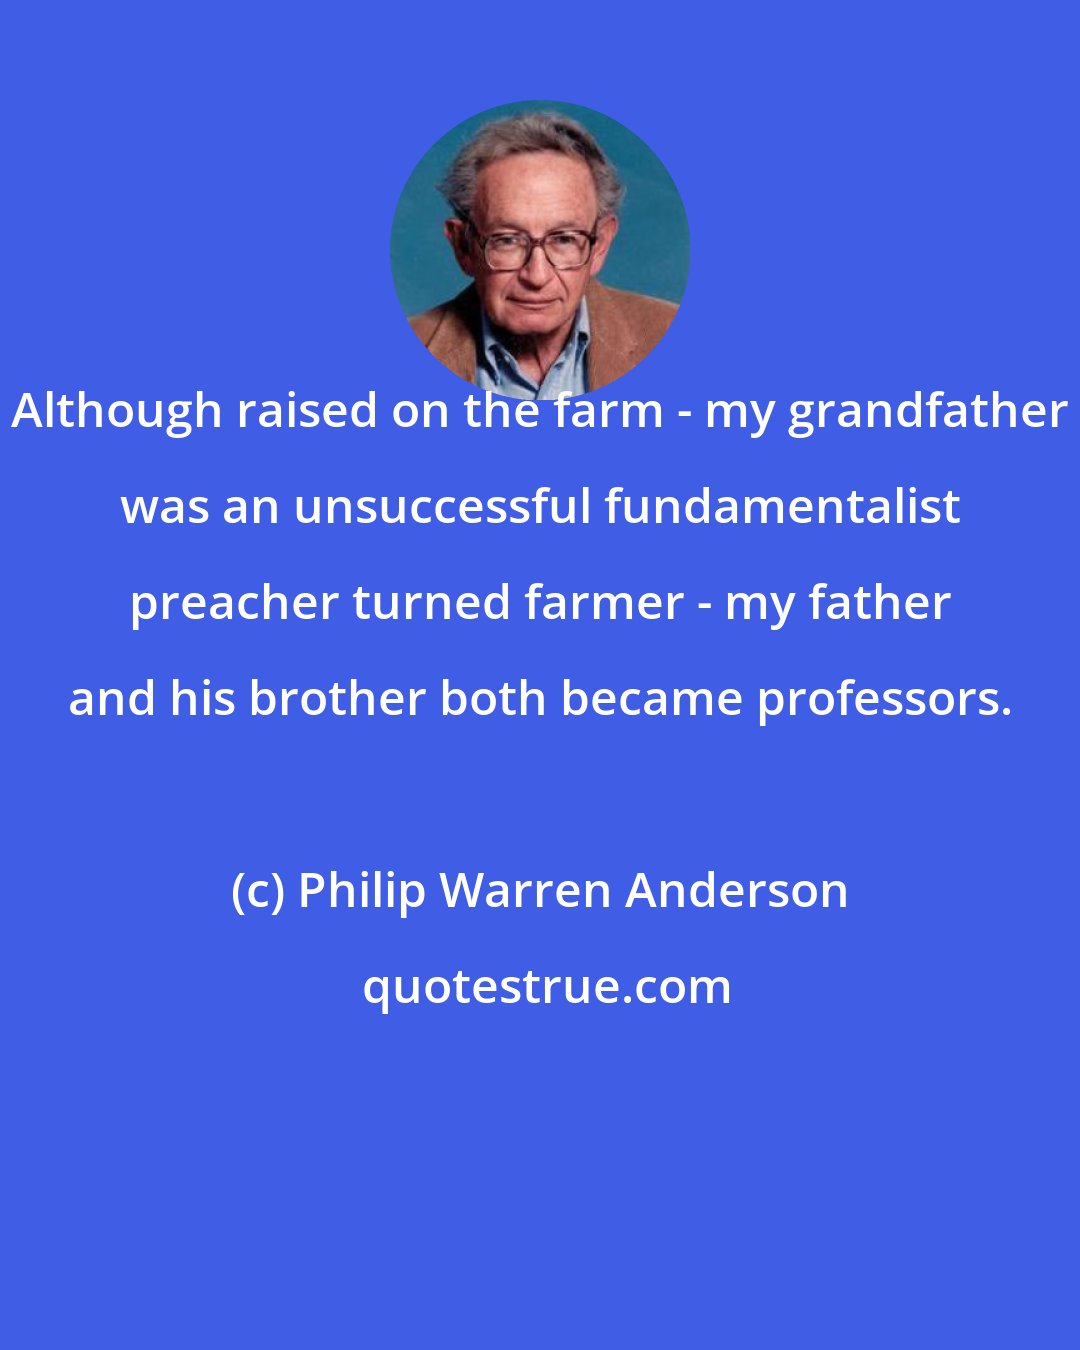 Philip Warren Anderson: Although raised on the farm - my grandfather was an unsuccessful fundamentalist preacher turned farmer - my father and his brother both became professors.